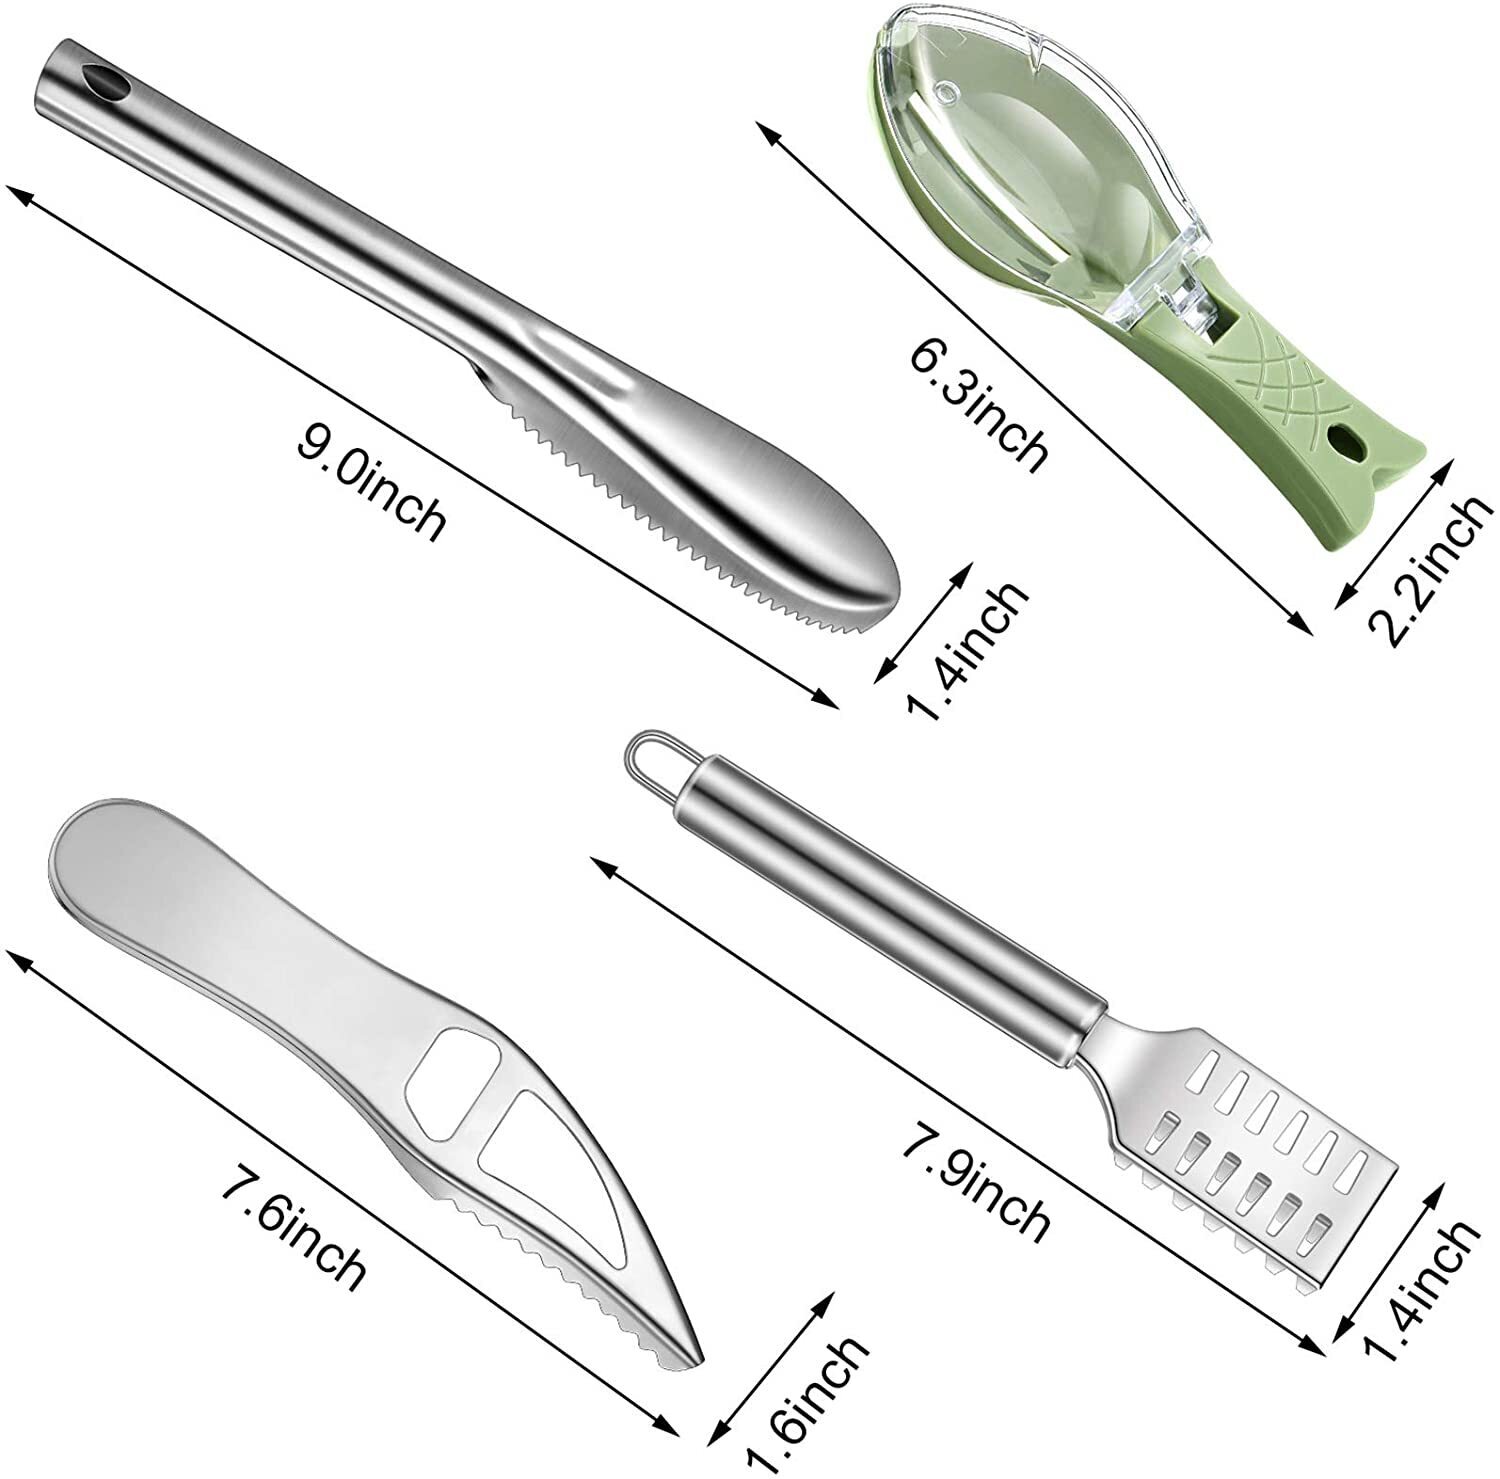 4 Pieces Fish Scale Remover Stainless Steel Descaler